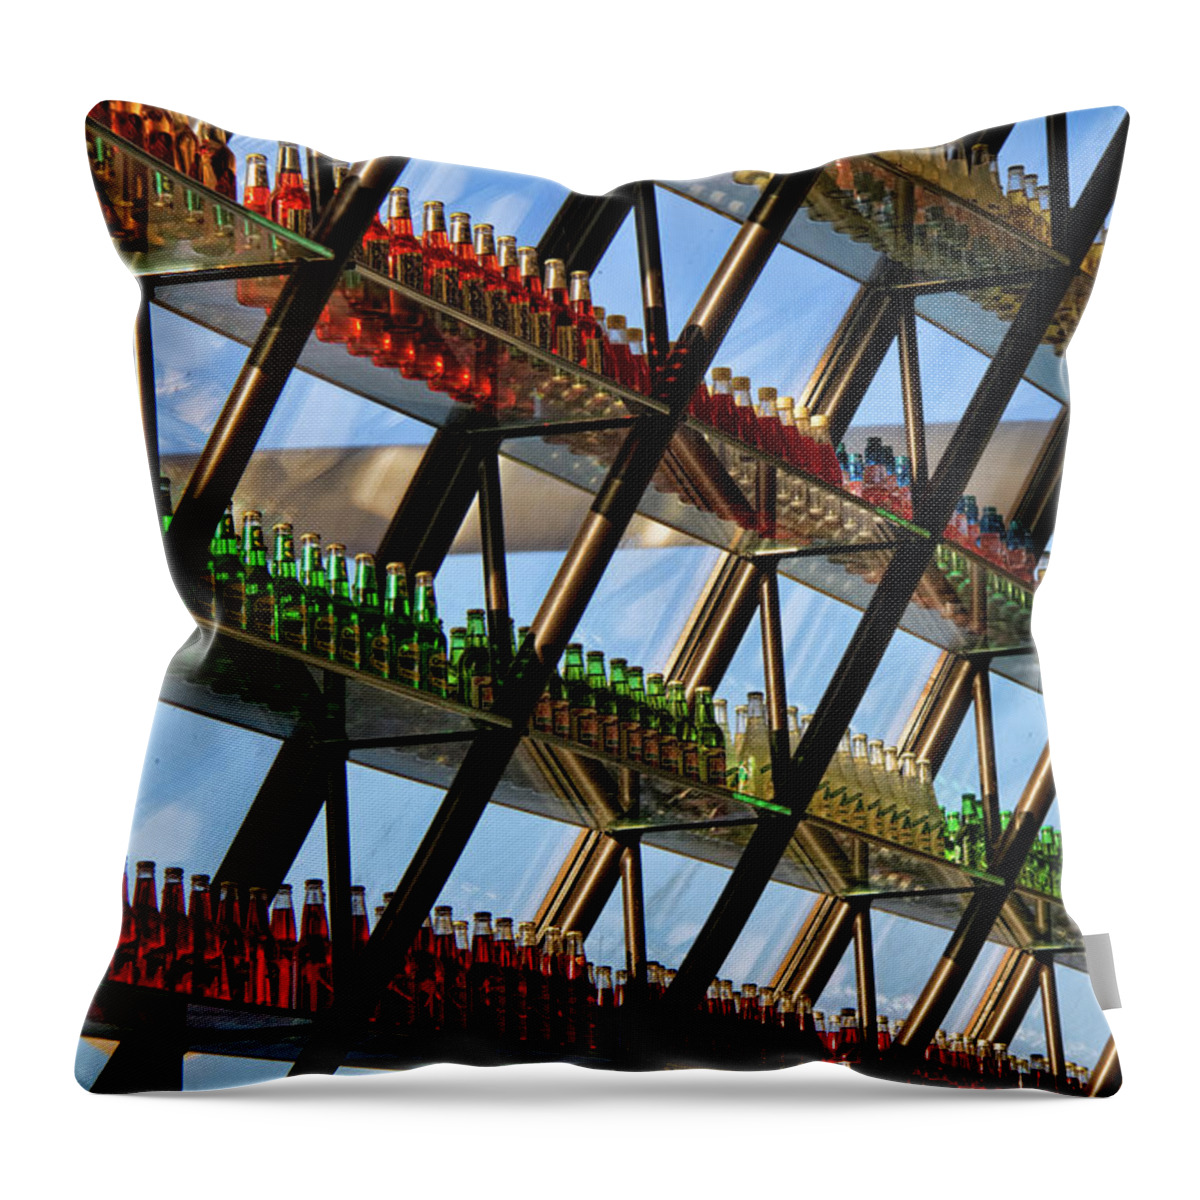 Pop's Throw Pillow featuring the photograph Pop's Bottles by Lana Trussell